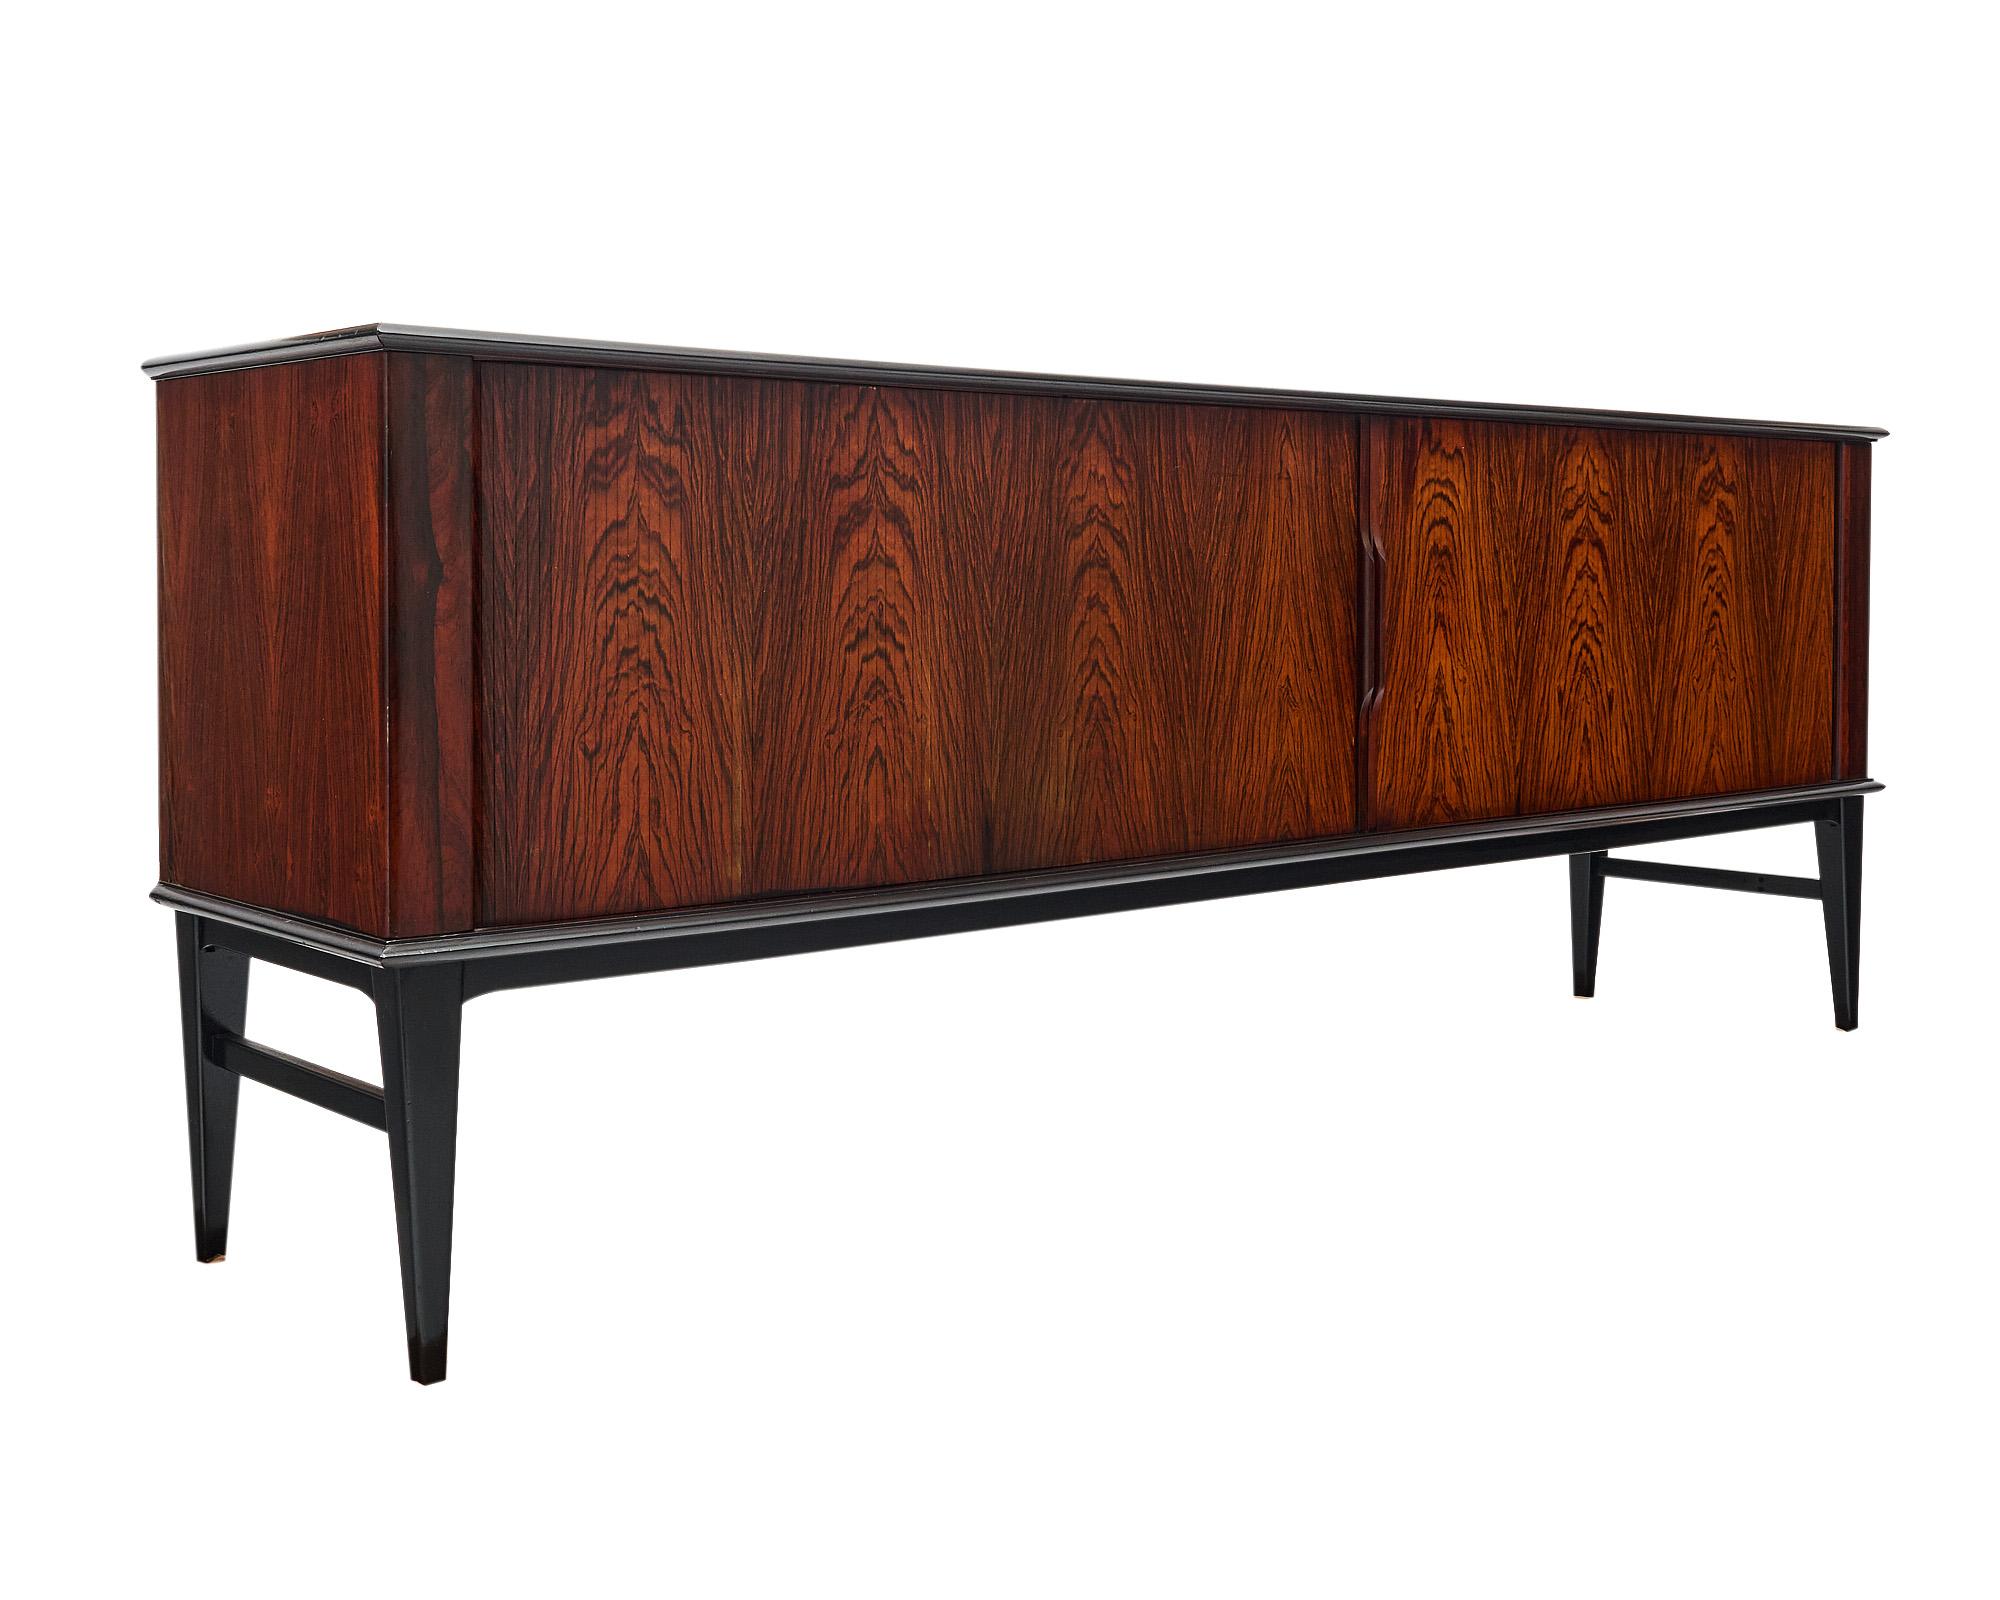 Enfilade or buffet, Danish, made of striking Brazilian Rosewood. The sideboard features tapered legs and “tambour doors“ with hand-carved wood handles opening to interior shelving and four central dovetailed drawers. The drawers are felt lined. This